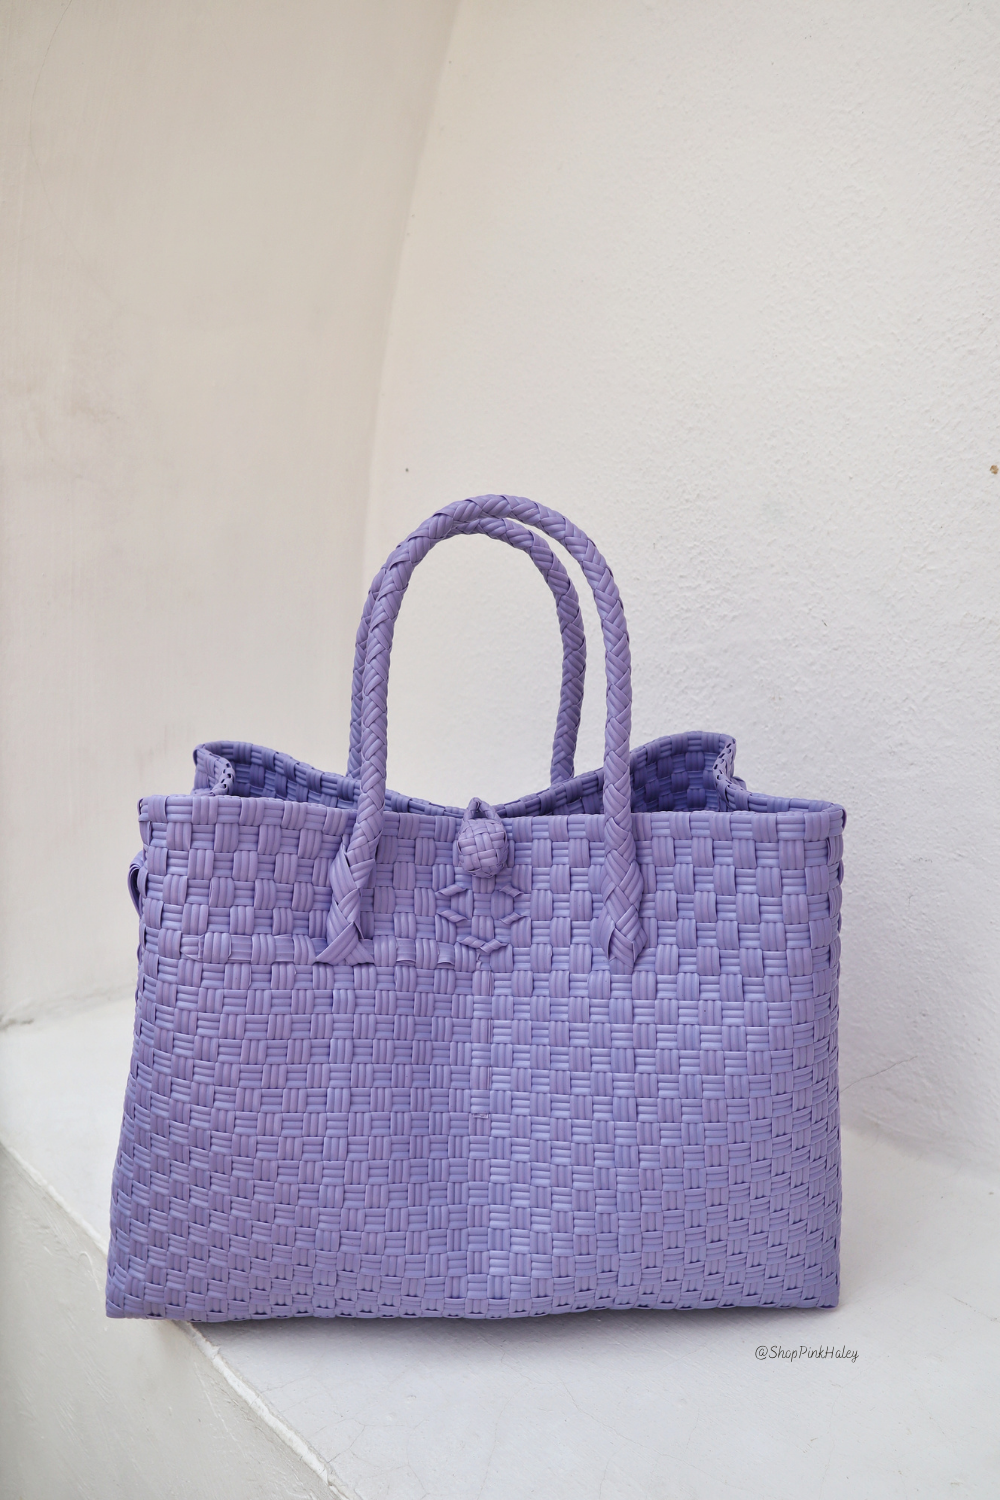 Lola Recycled Plastic Woven Tote Large - Lavender